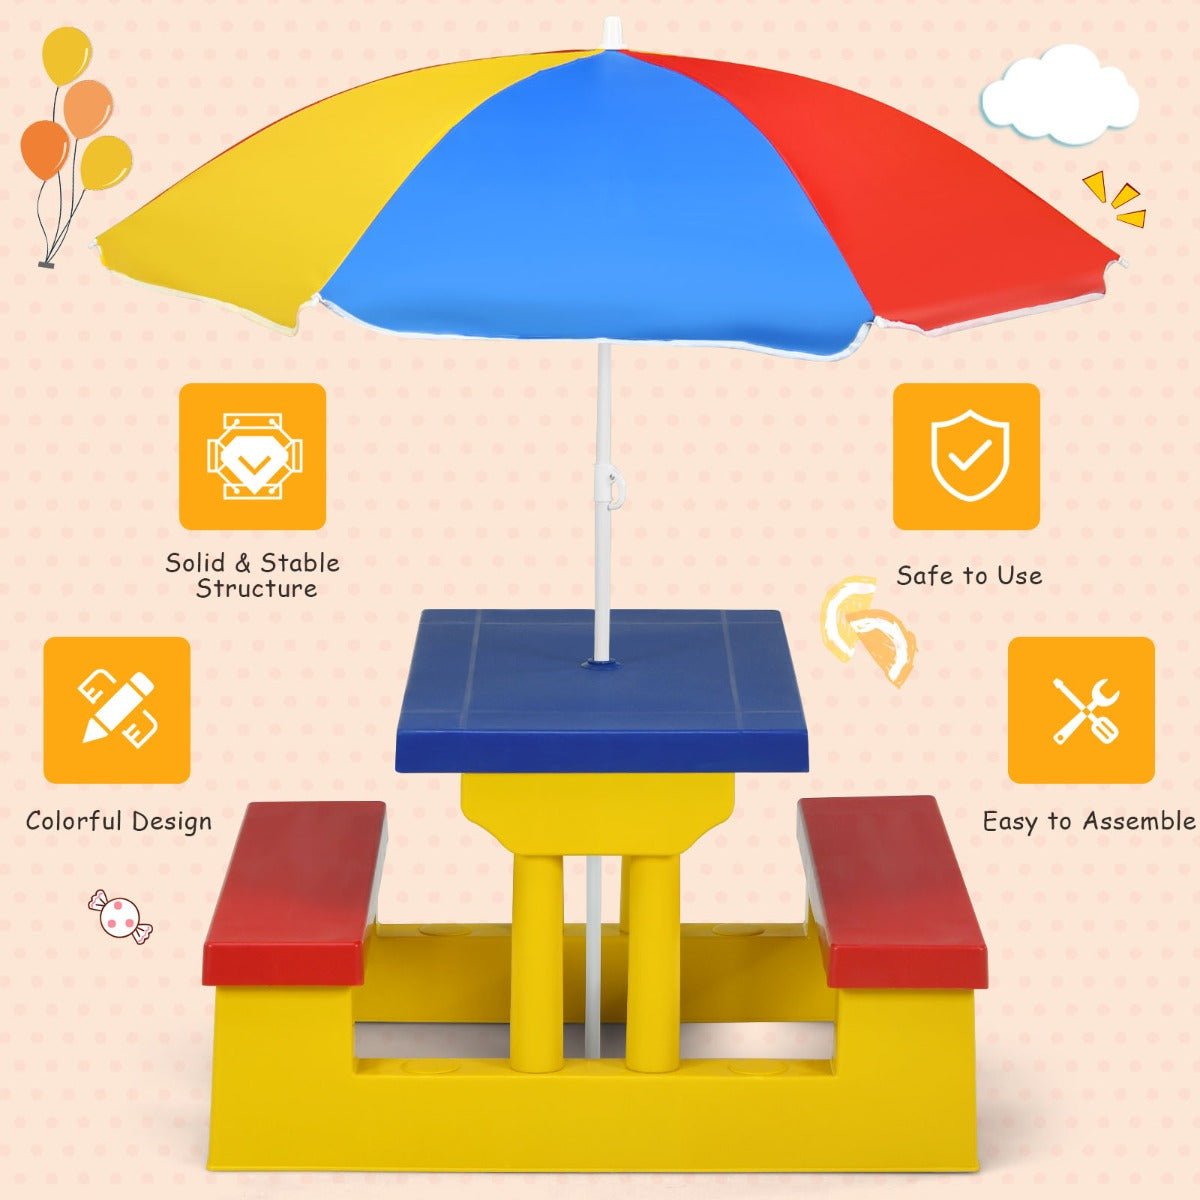 Enchanting Children's Picnic Table: Create Memories with colour and Umbrella